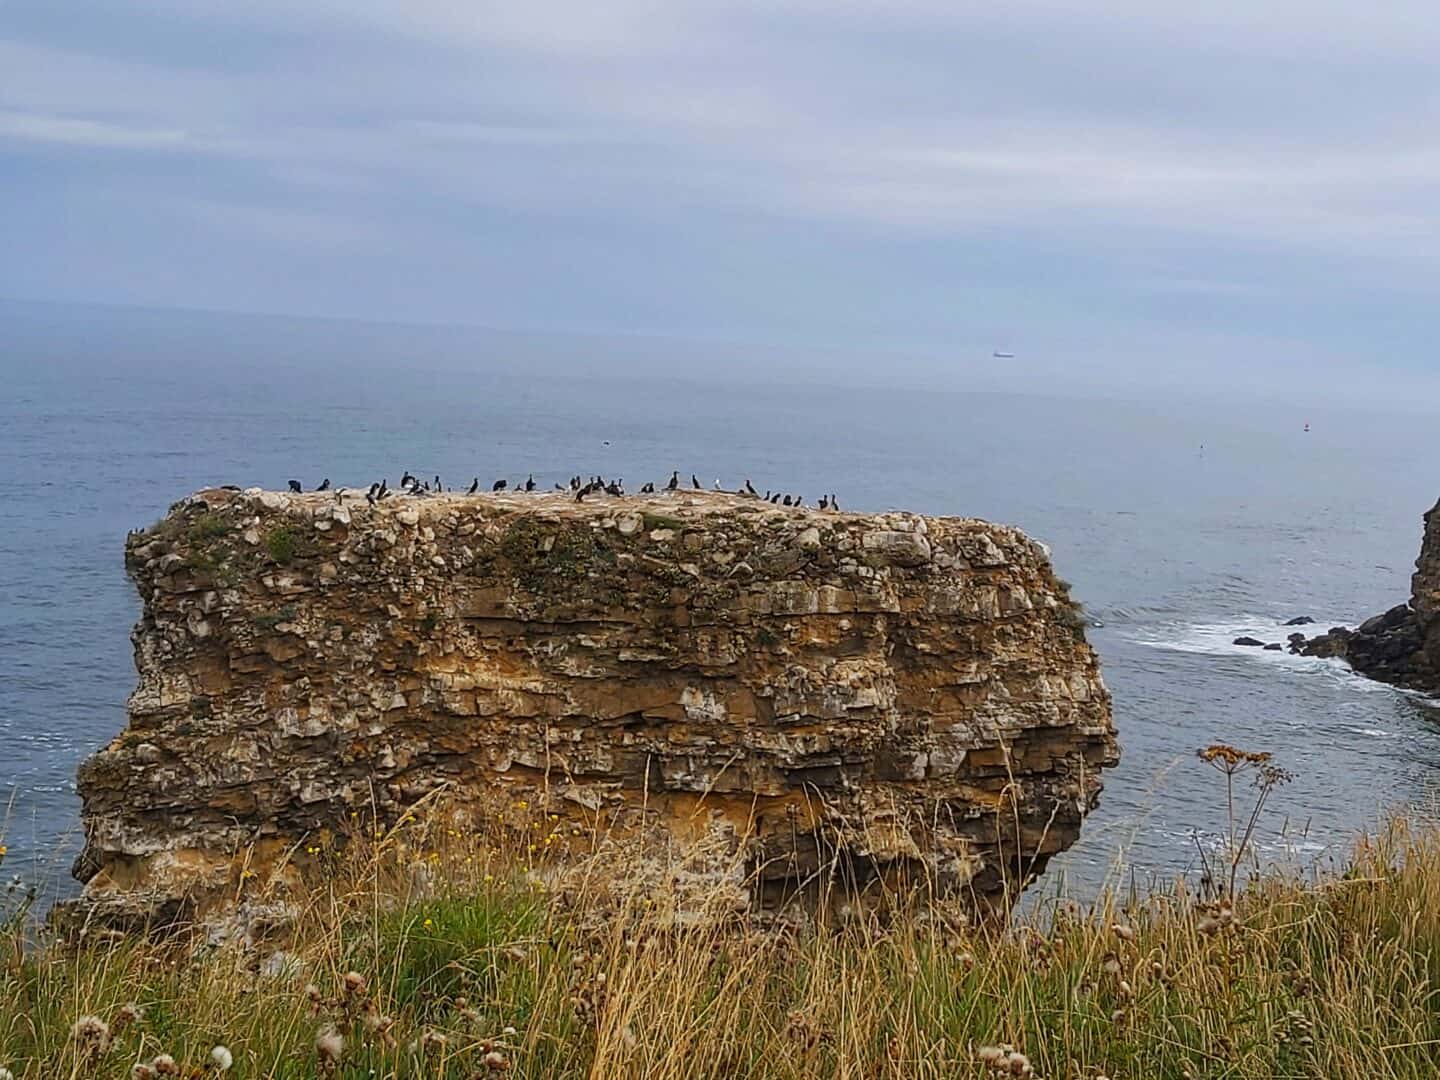 Birds nesting on a rock stack at the Leas.  